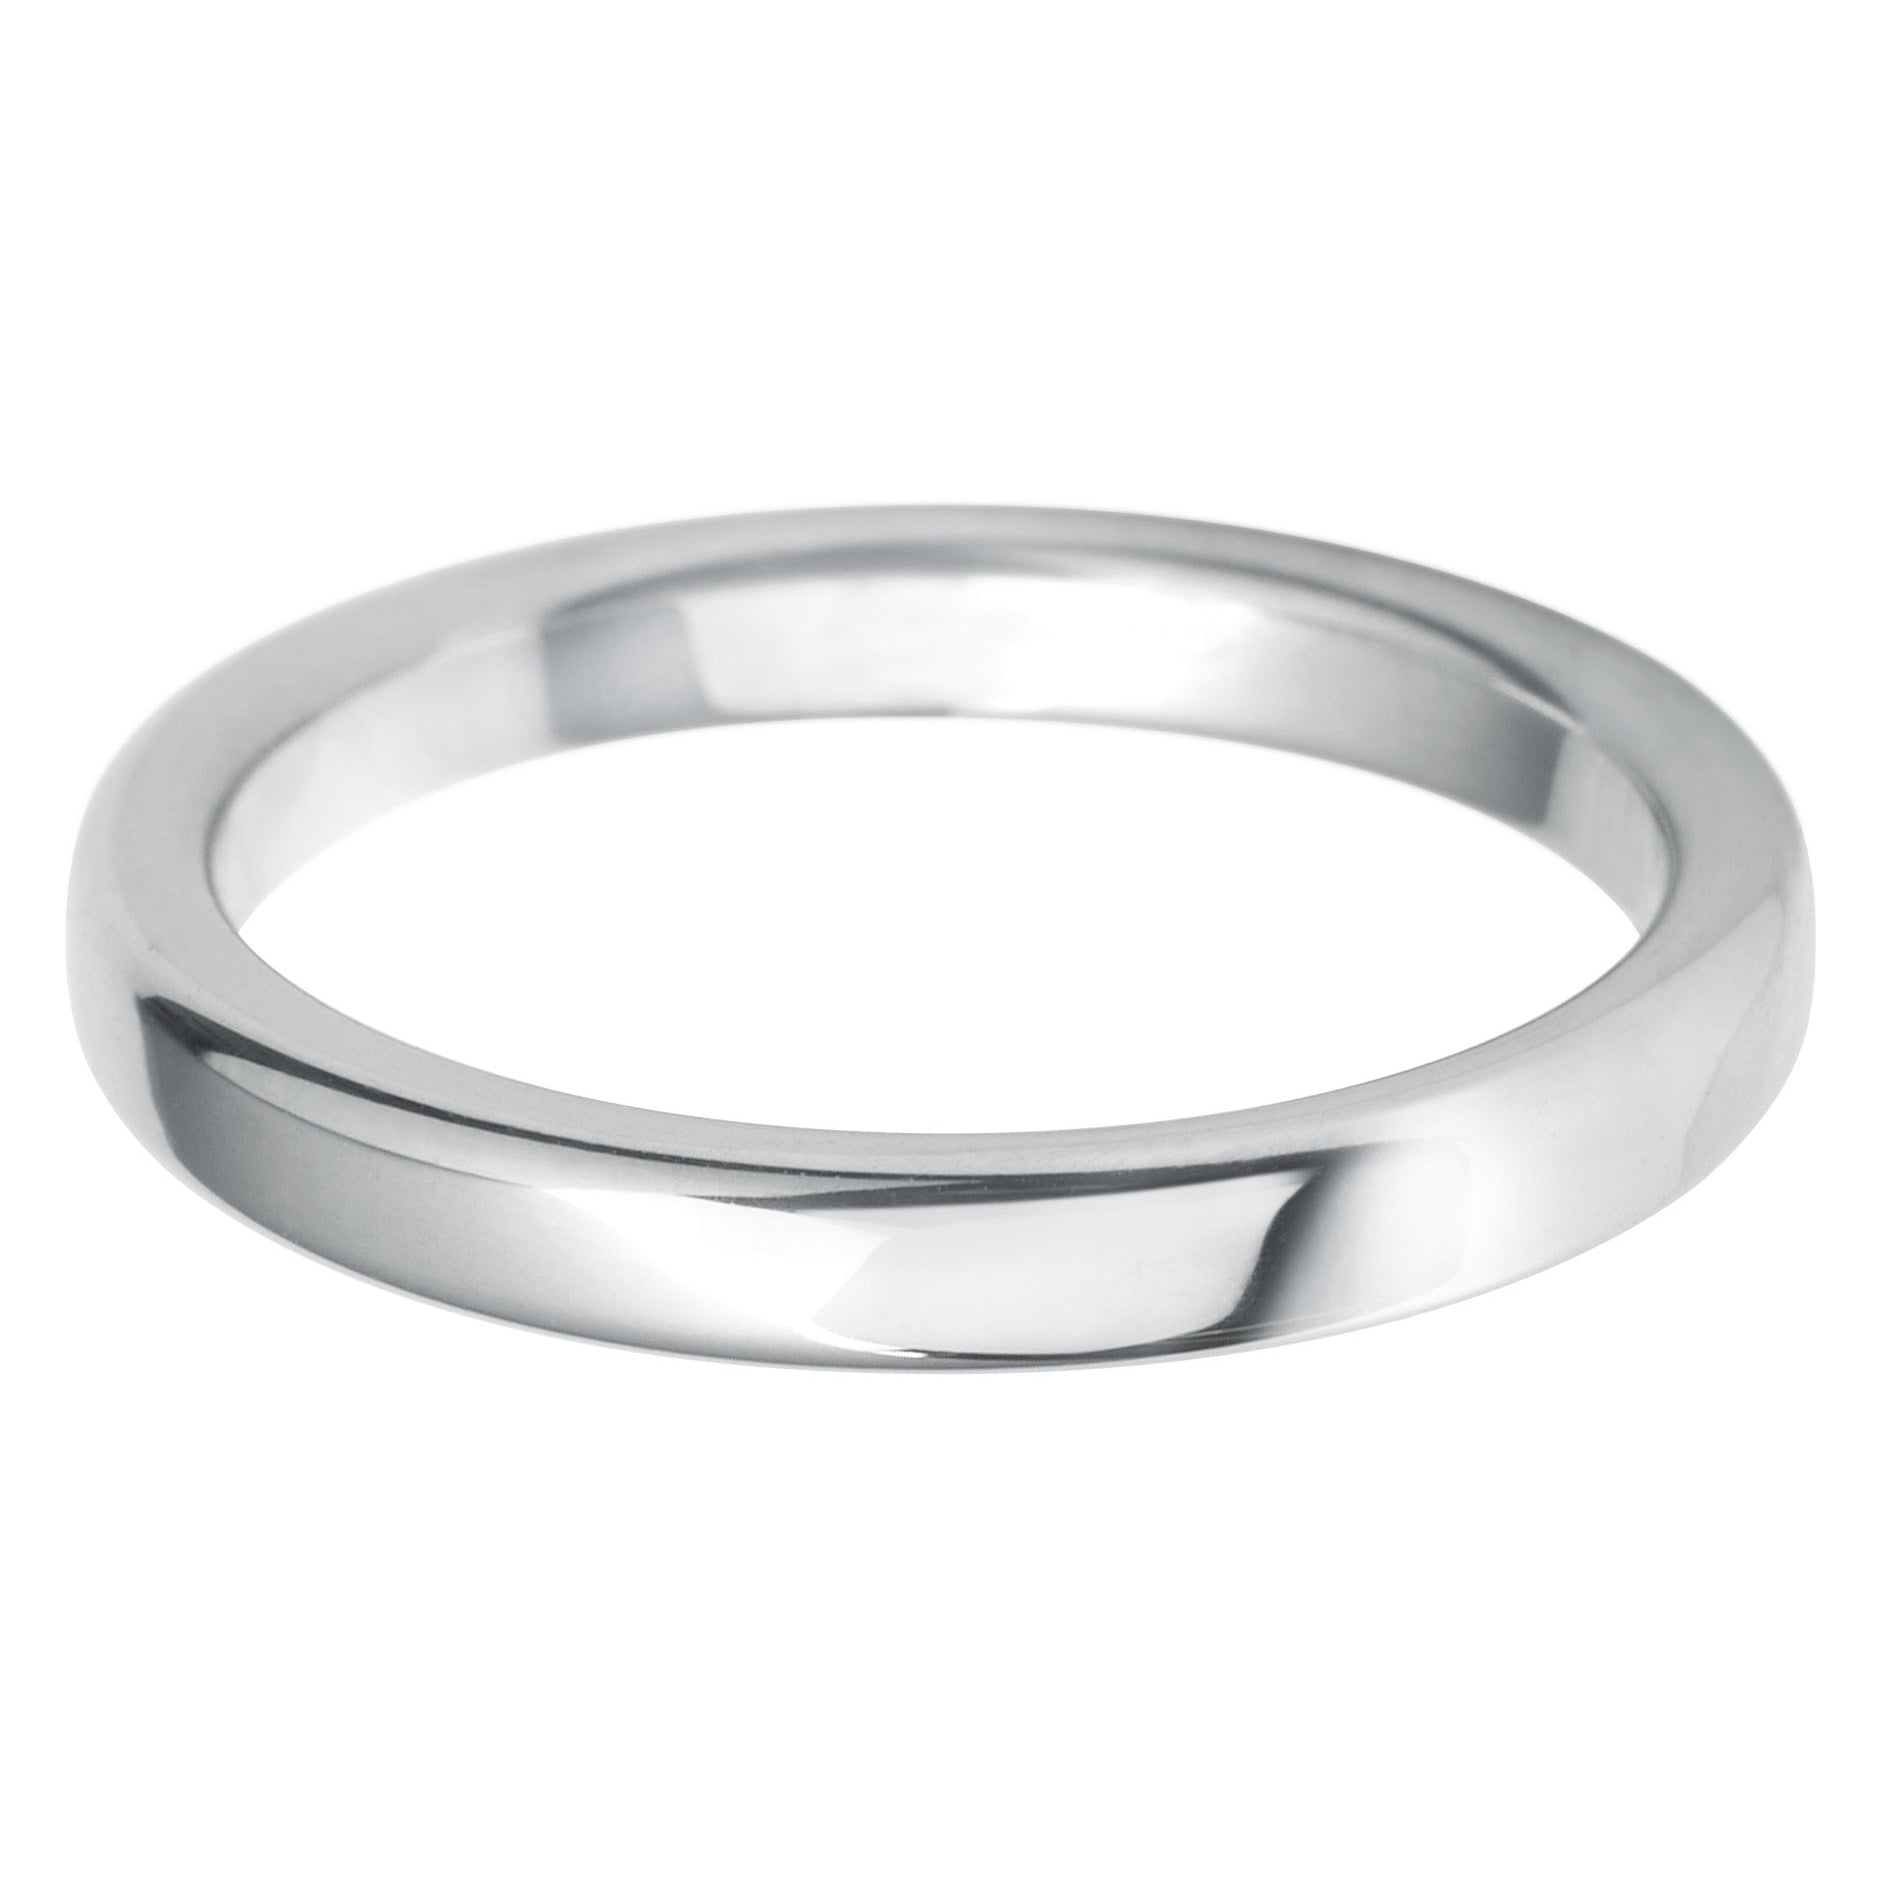 2.5mm Rounded Flat Heavy Weight Wedding Ring